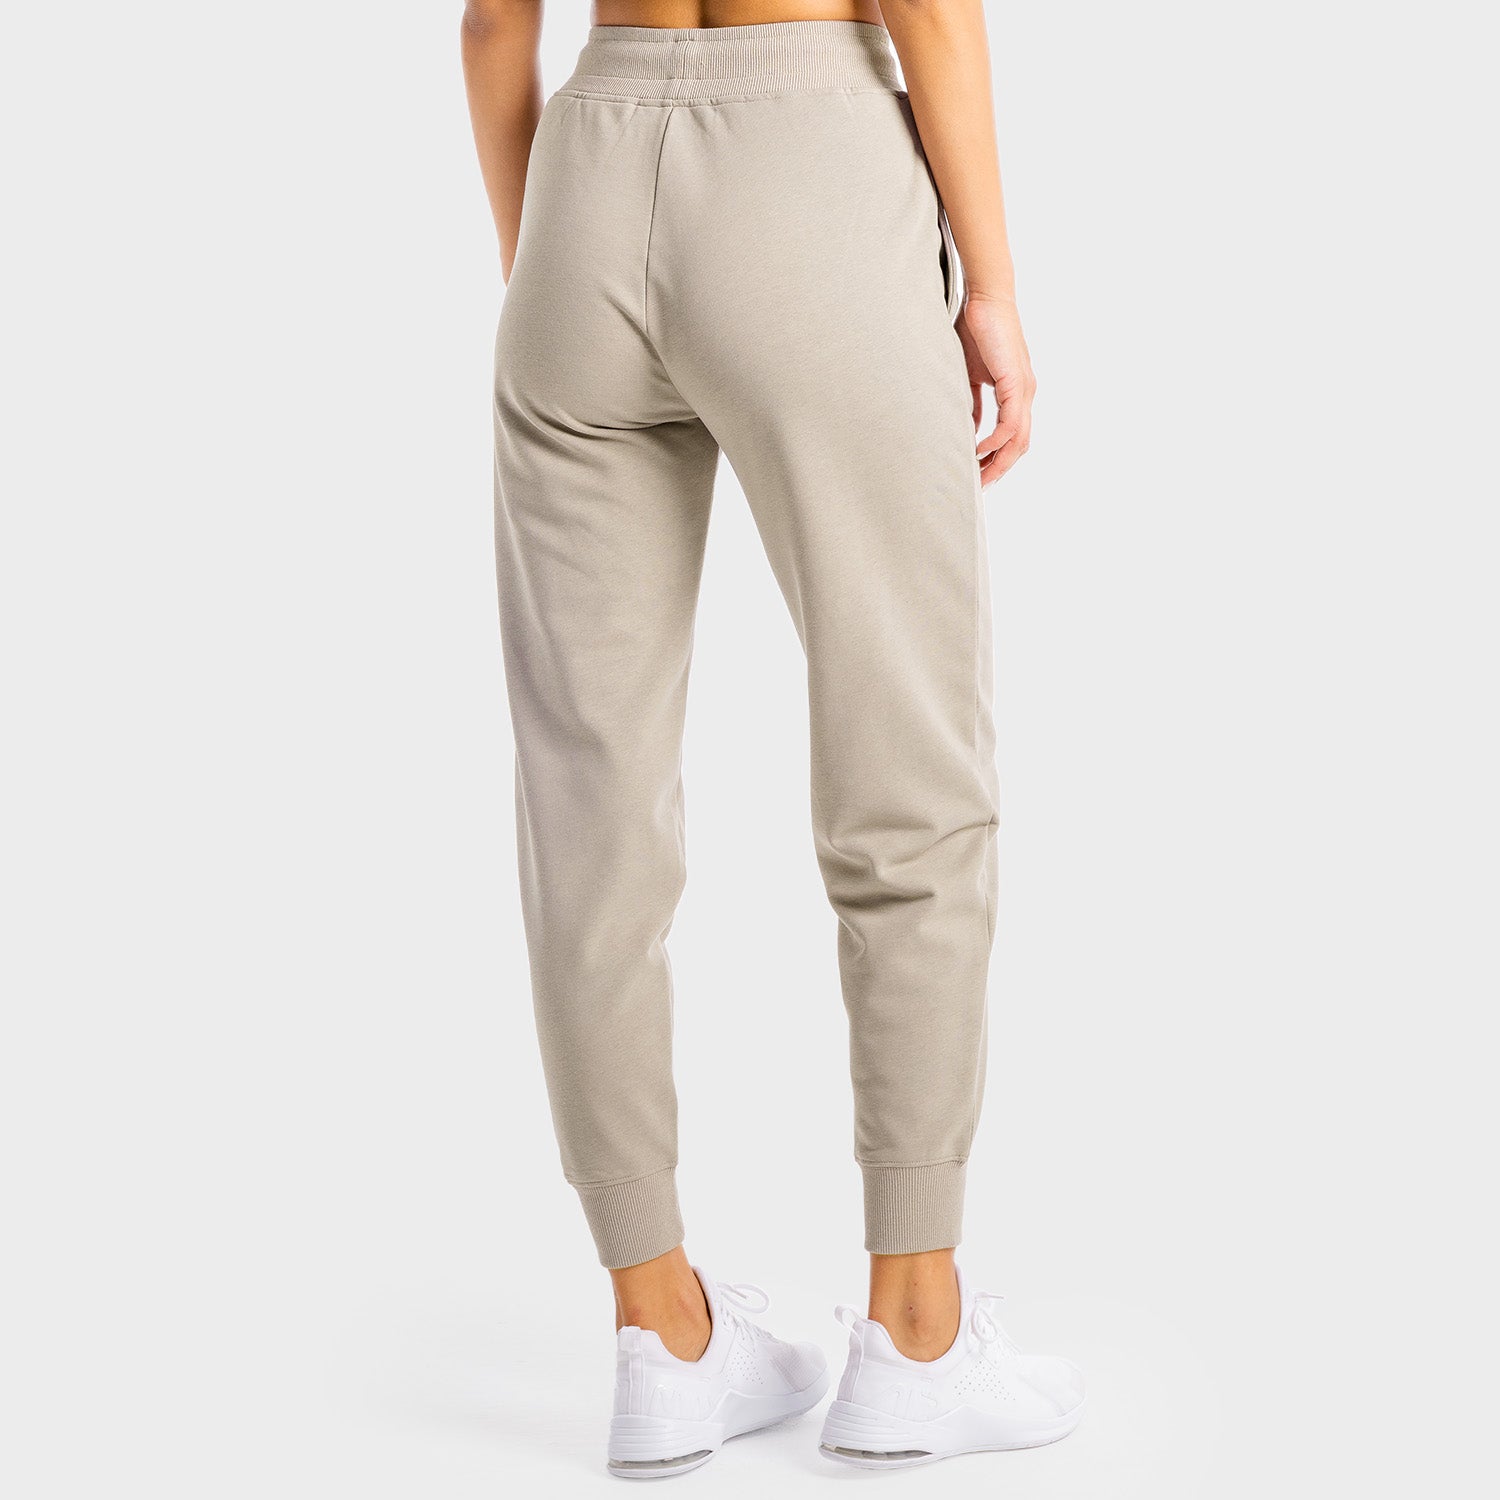 squatwolf-gym-pants-for-women-core-oversize-joggers-taupe-workout-clothes